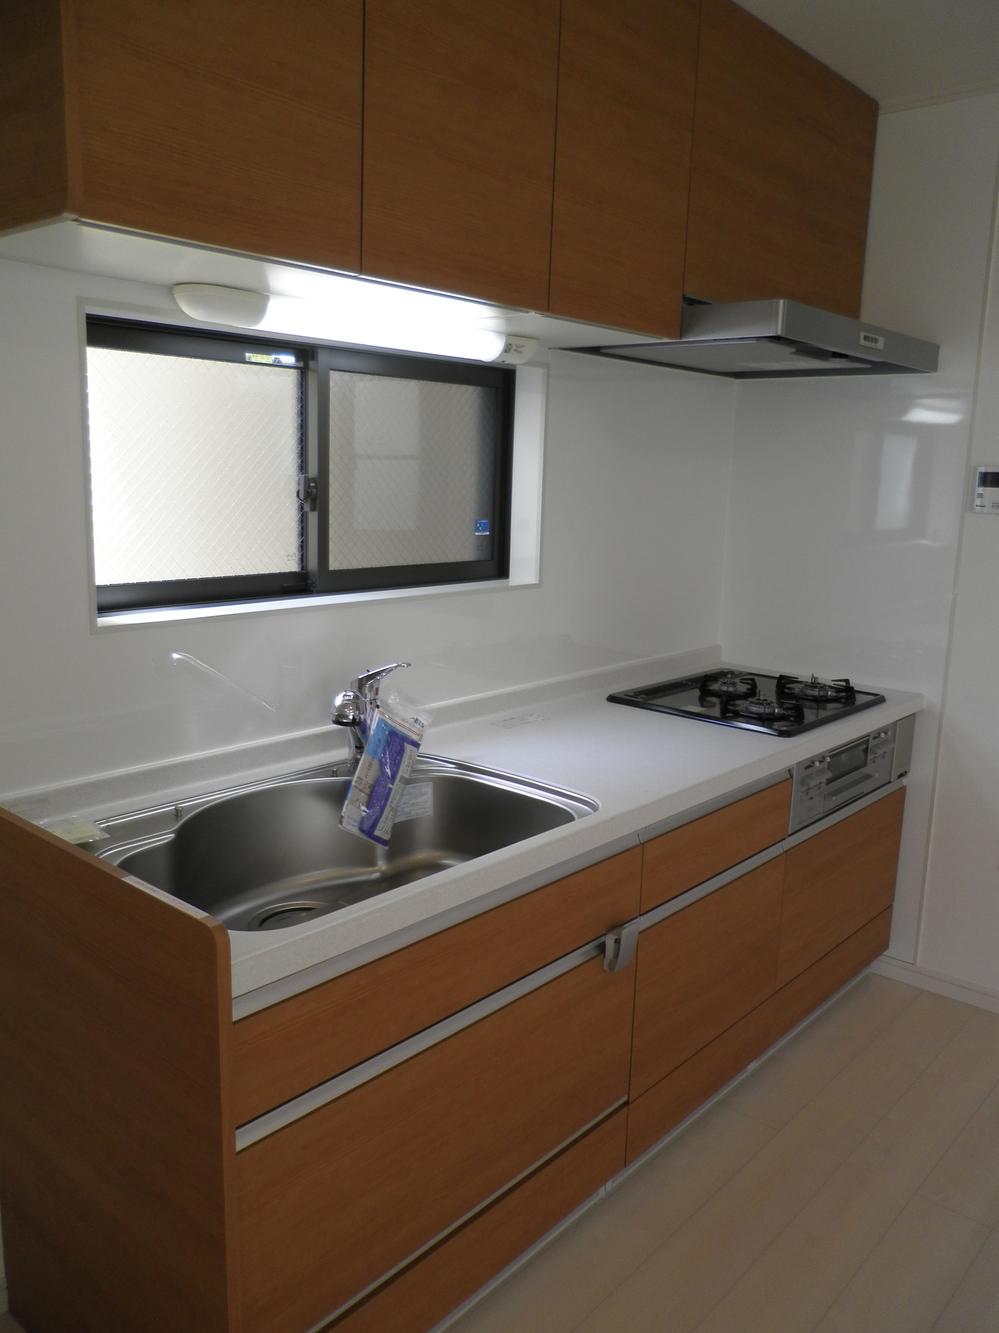 Same specifications photo (kitchen). Dishwasher washing machine with a system Kitchen. Faucet touch-less faucet, Door pocket easily removed with a patter-kun. Sink care easy for the coating and embossed with a quiet design. .